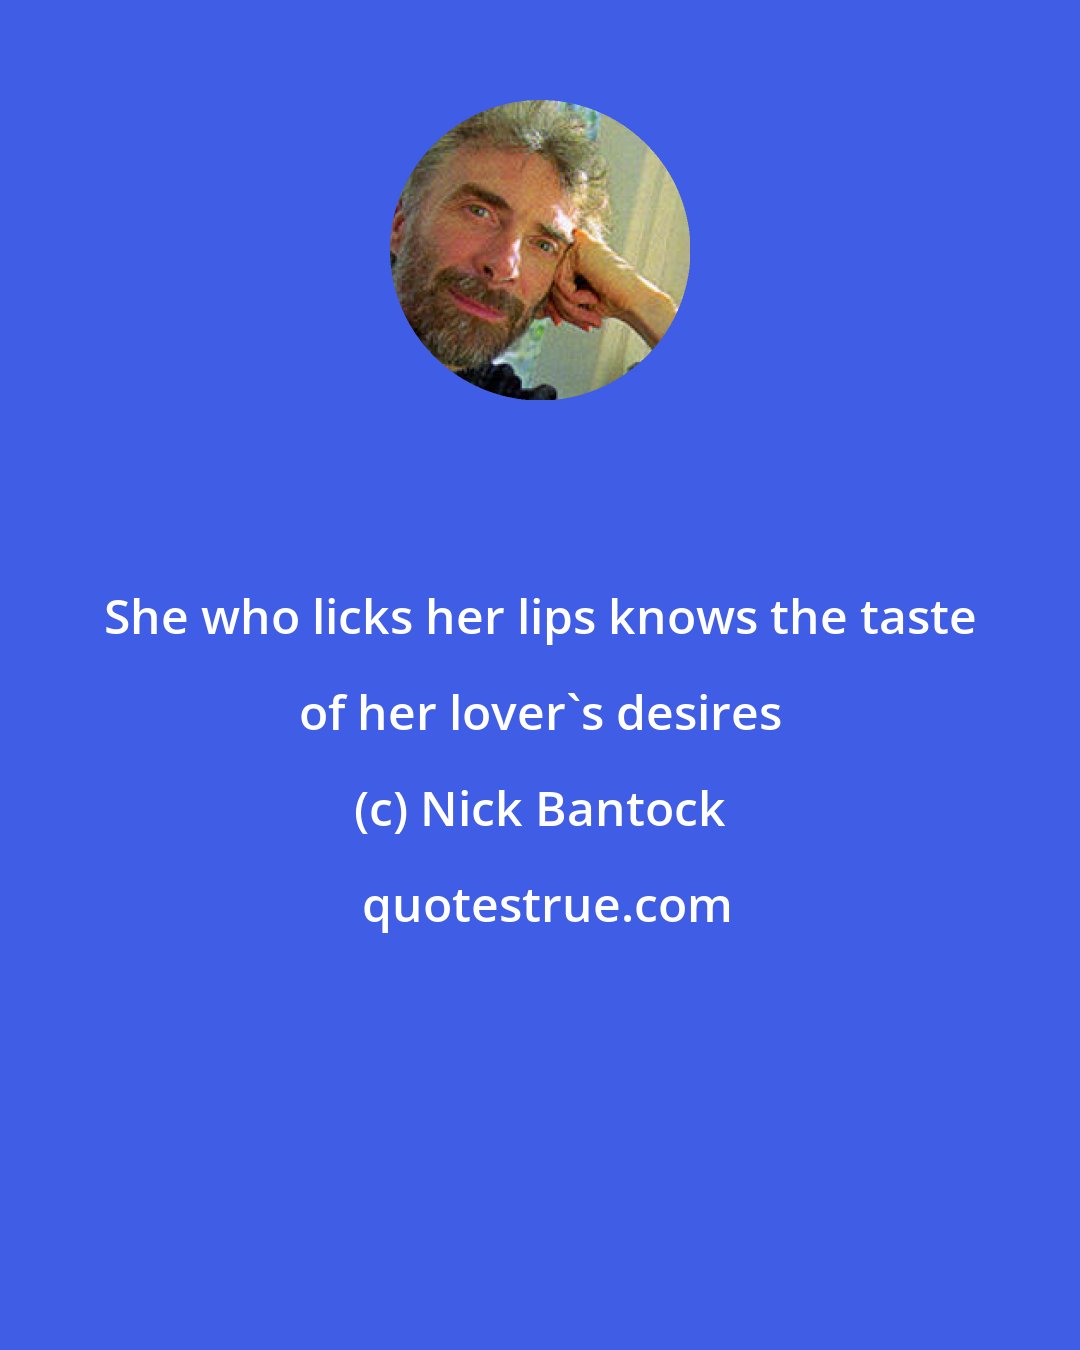 Nick Bantock: She who licks her lips knows the taste of her lover's desires